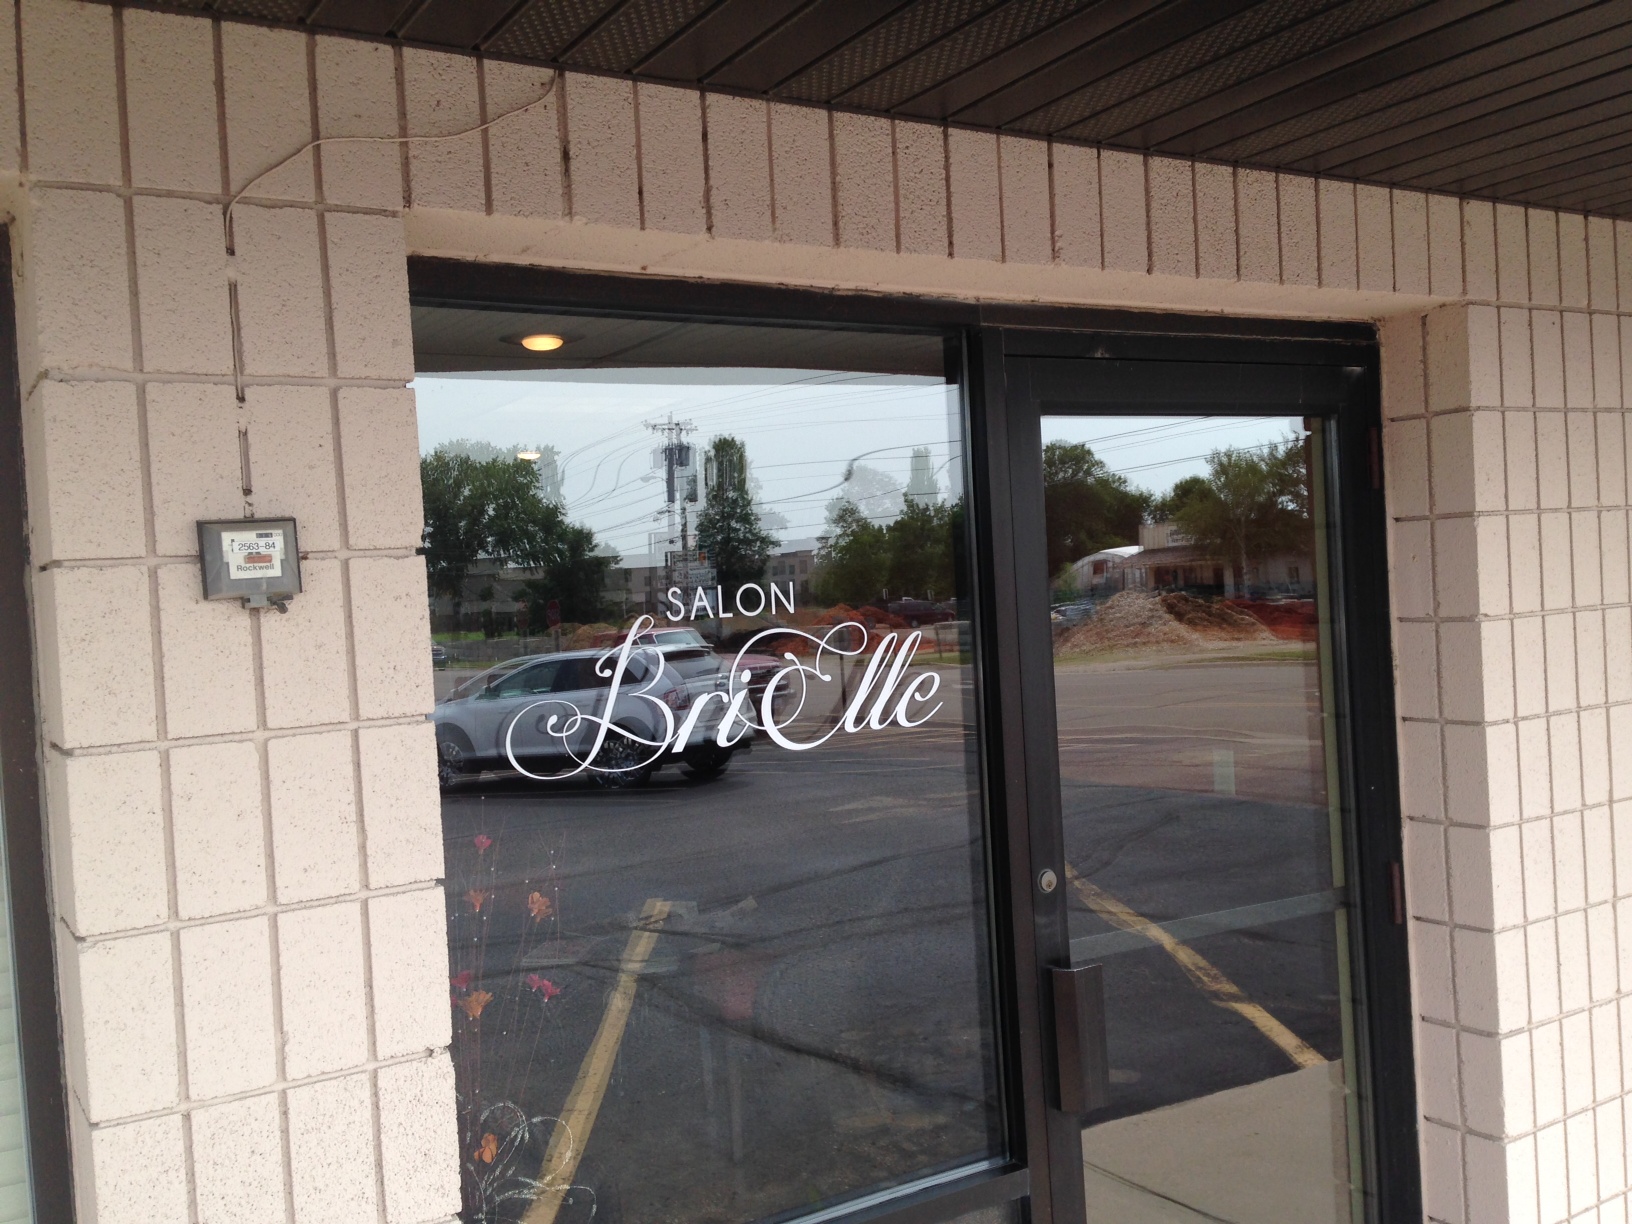 Custom business window lettering from Signmax